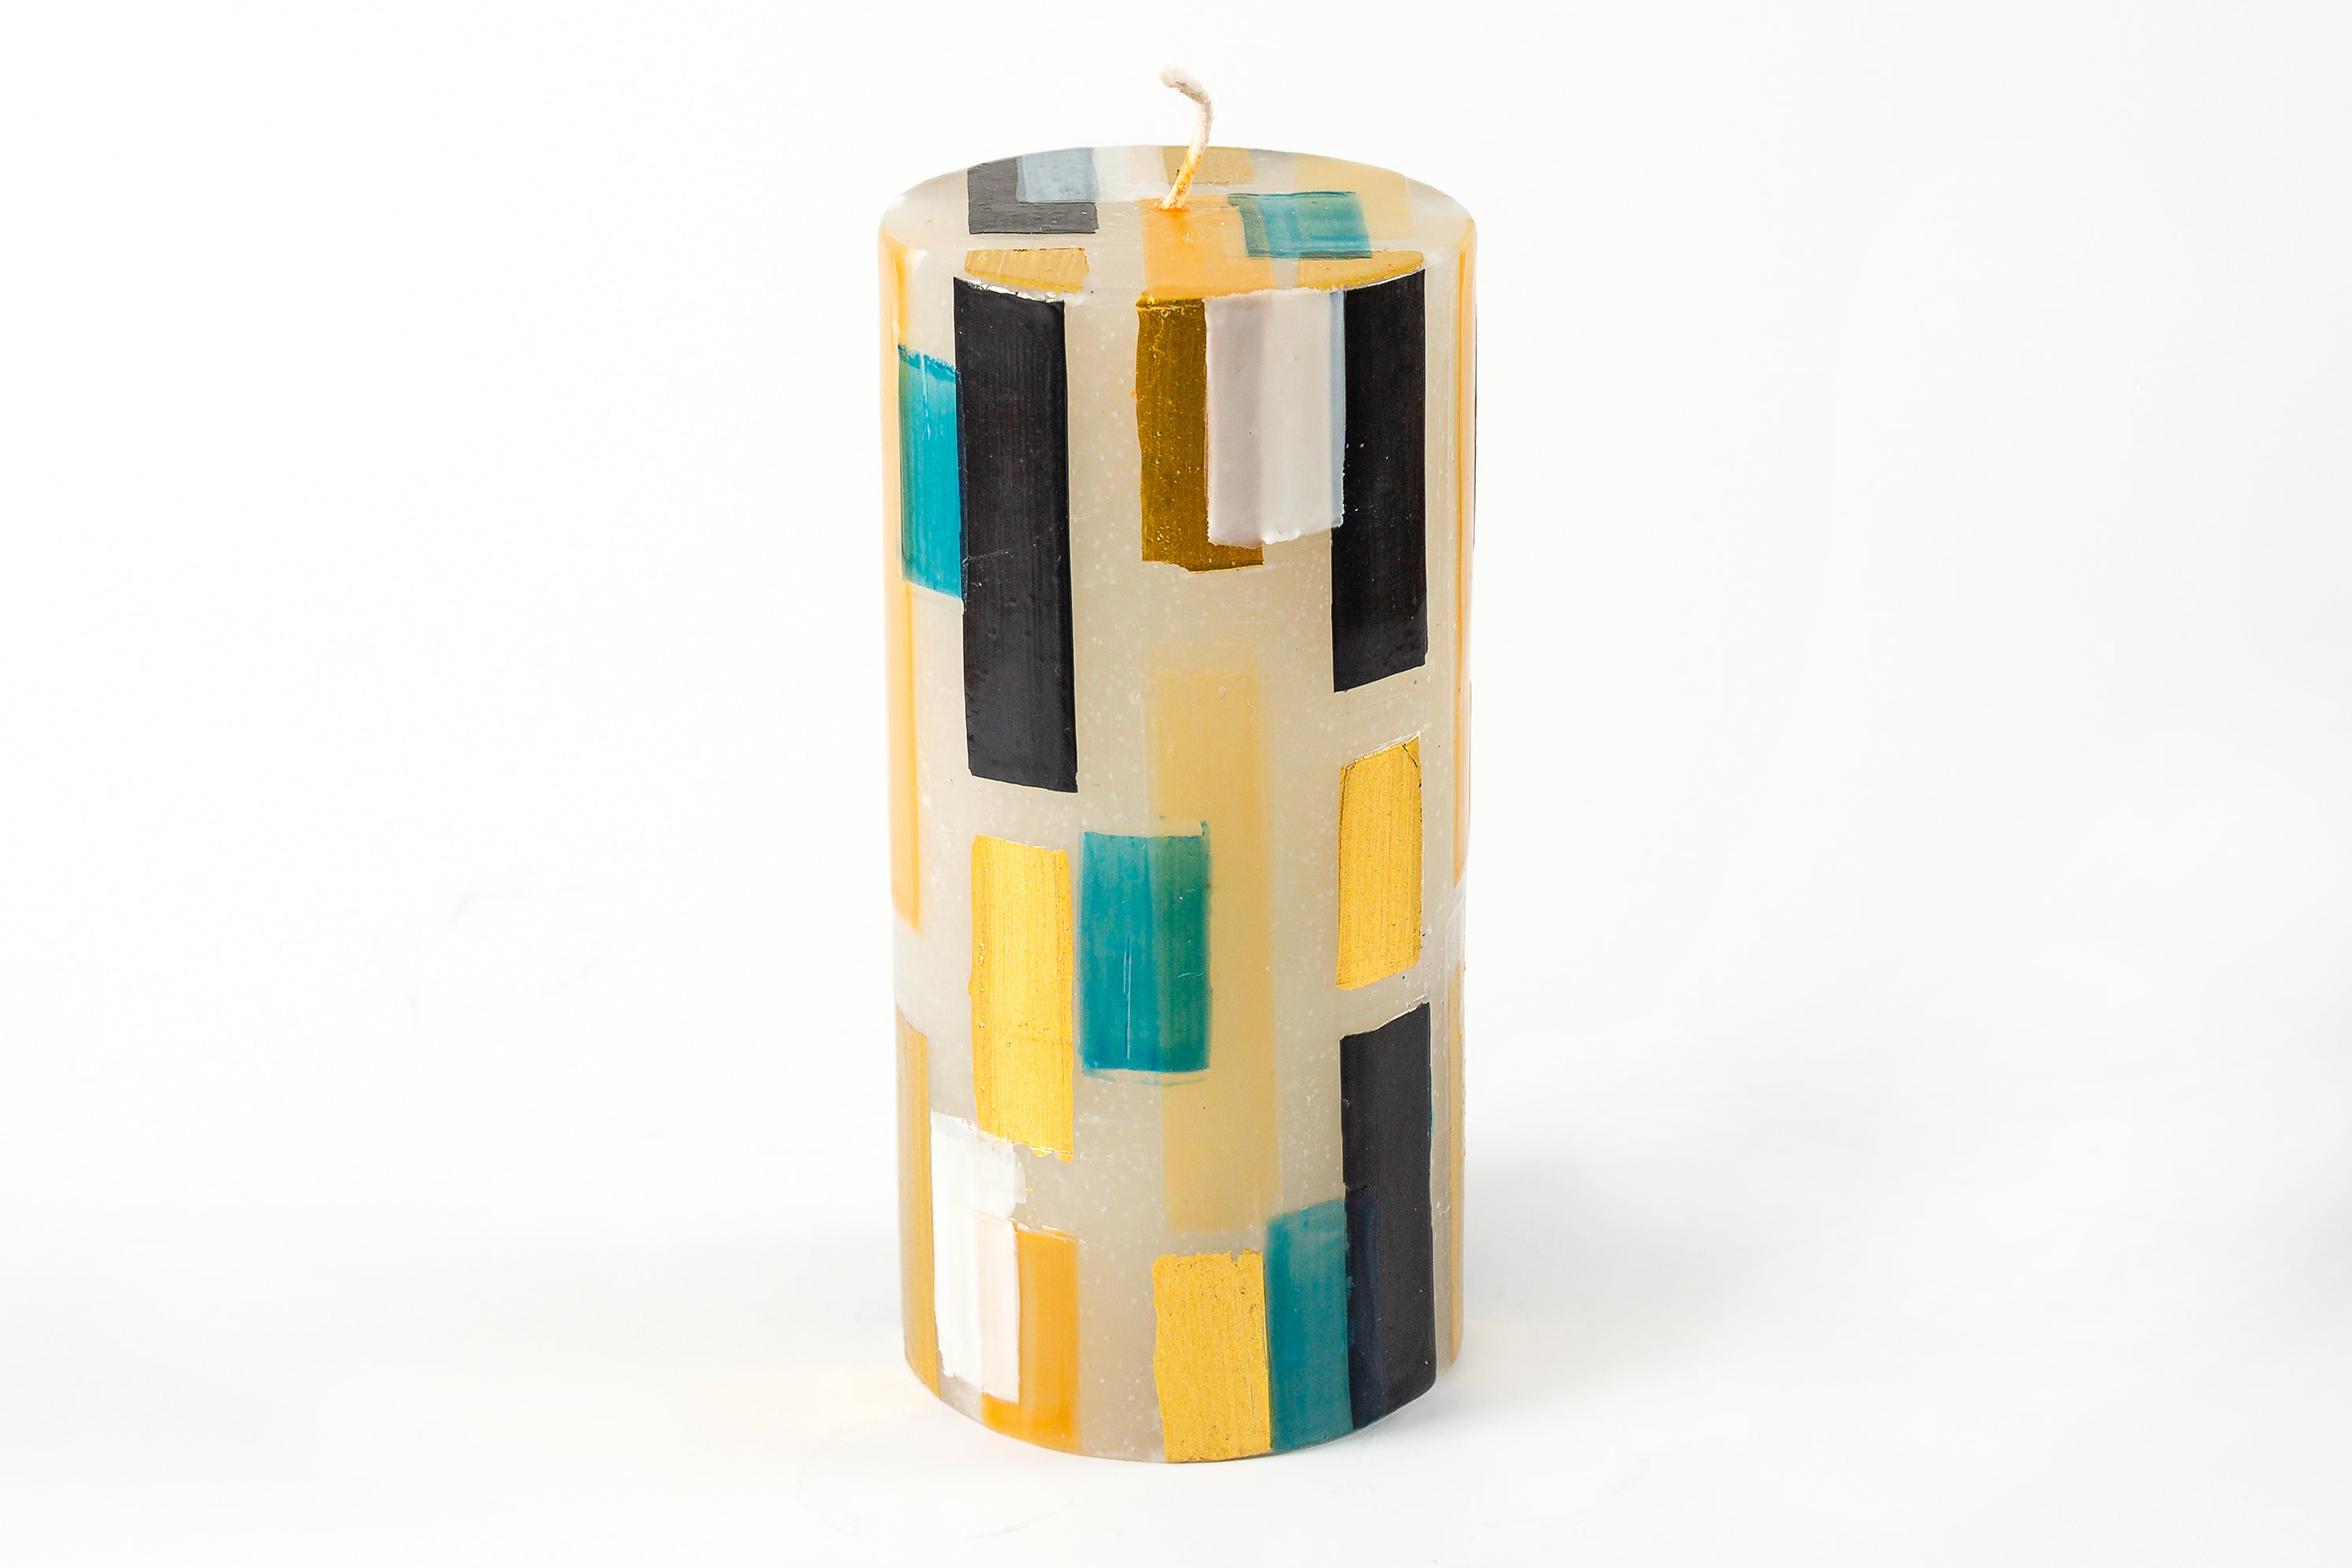 Klimt 3" x 6" Pillar Candle. Creamy white base color candles with touches of black, gold along with hints of turquoise.